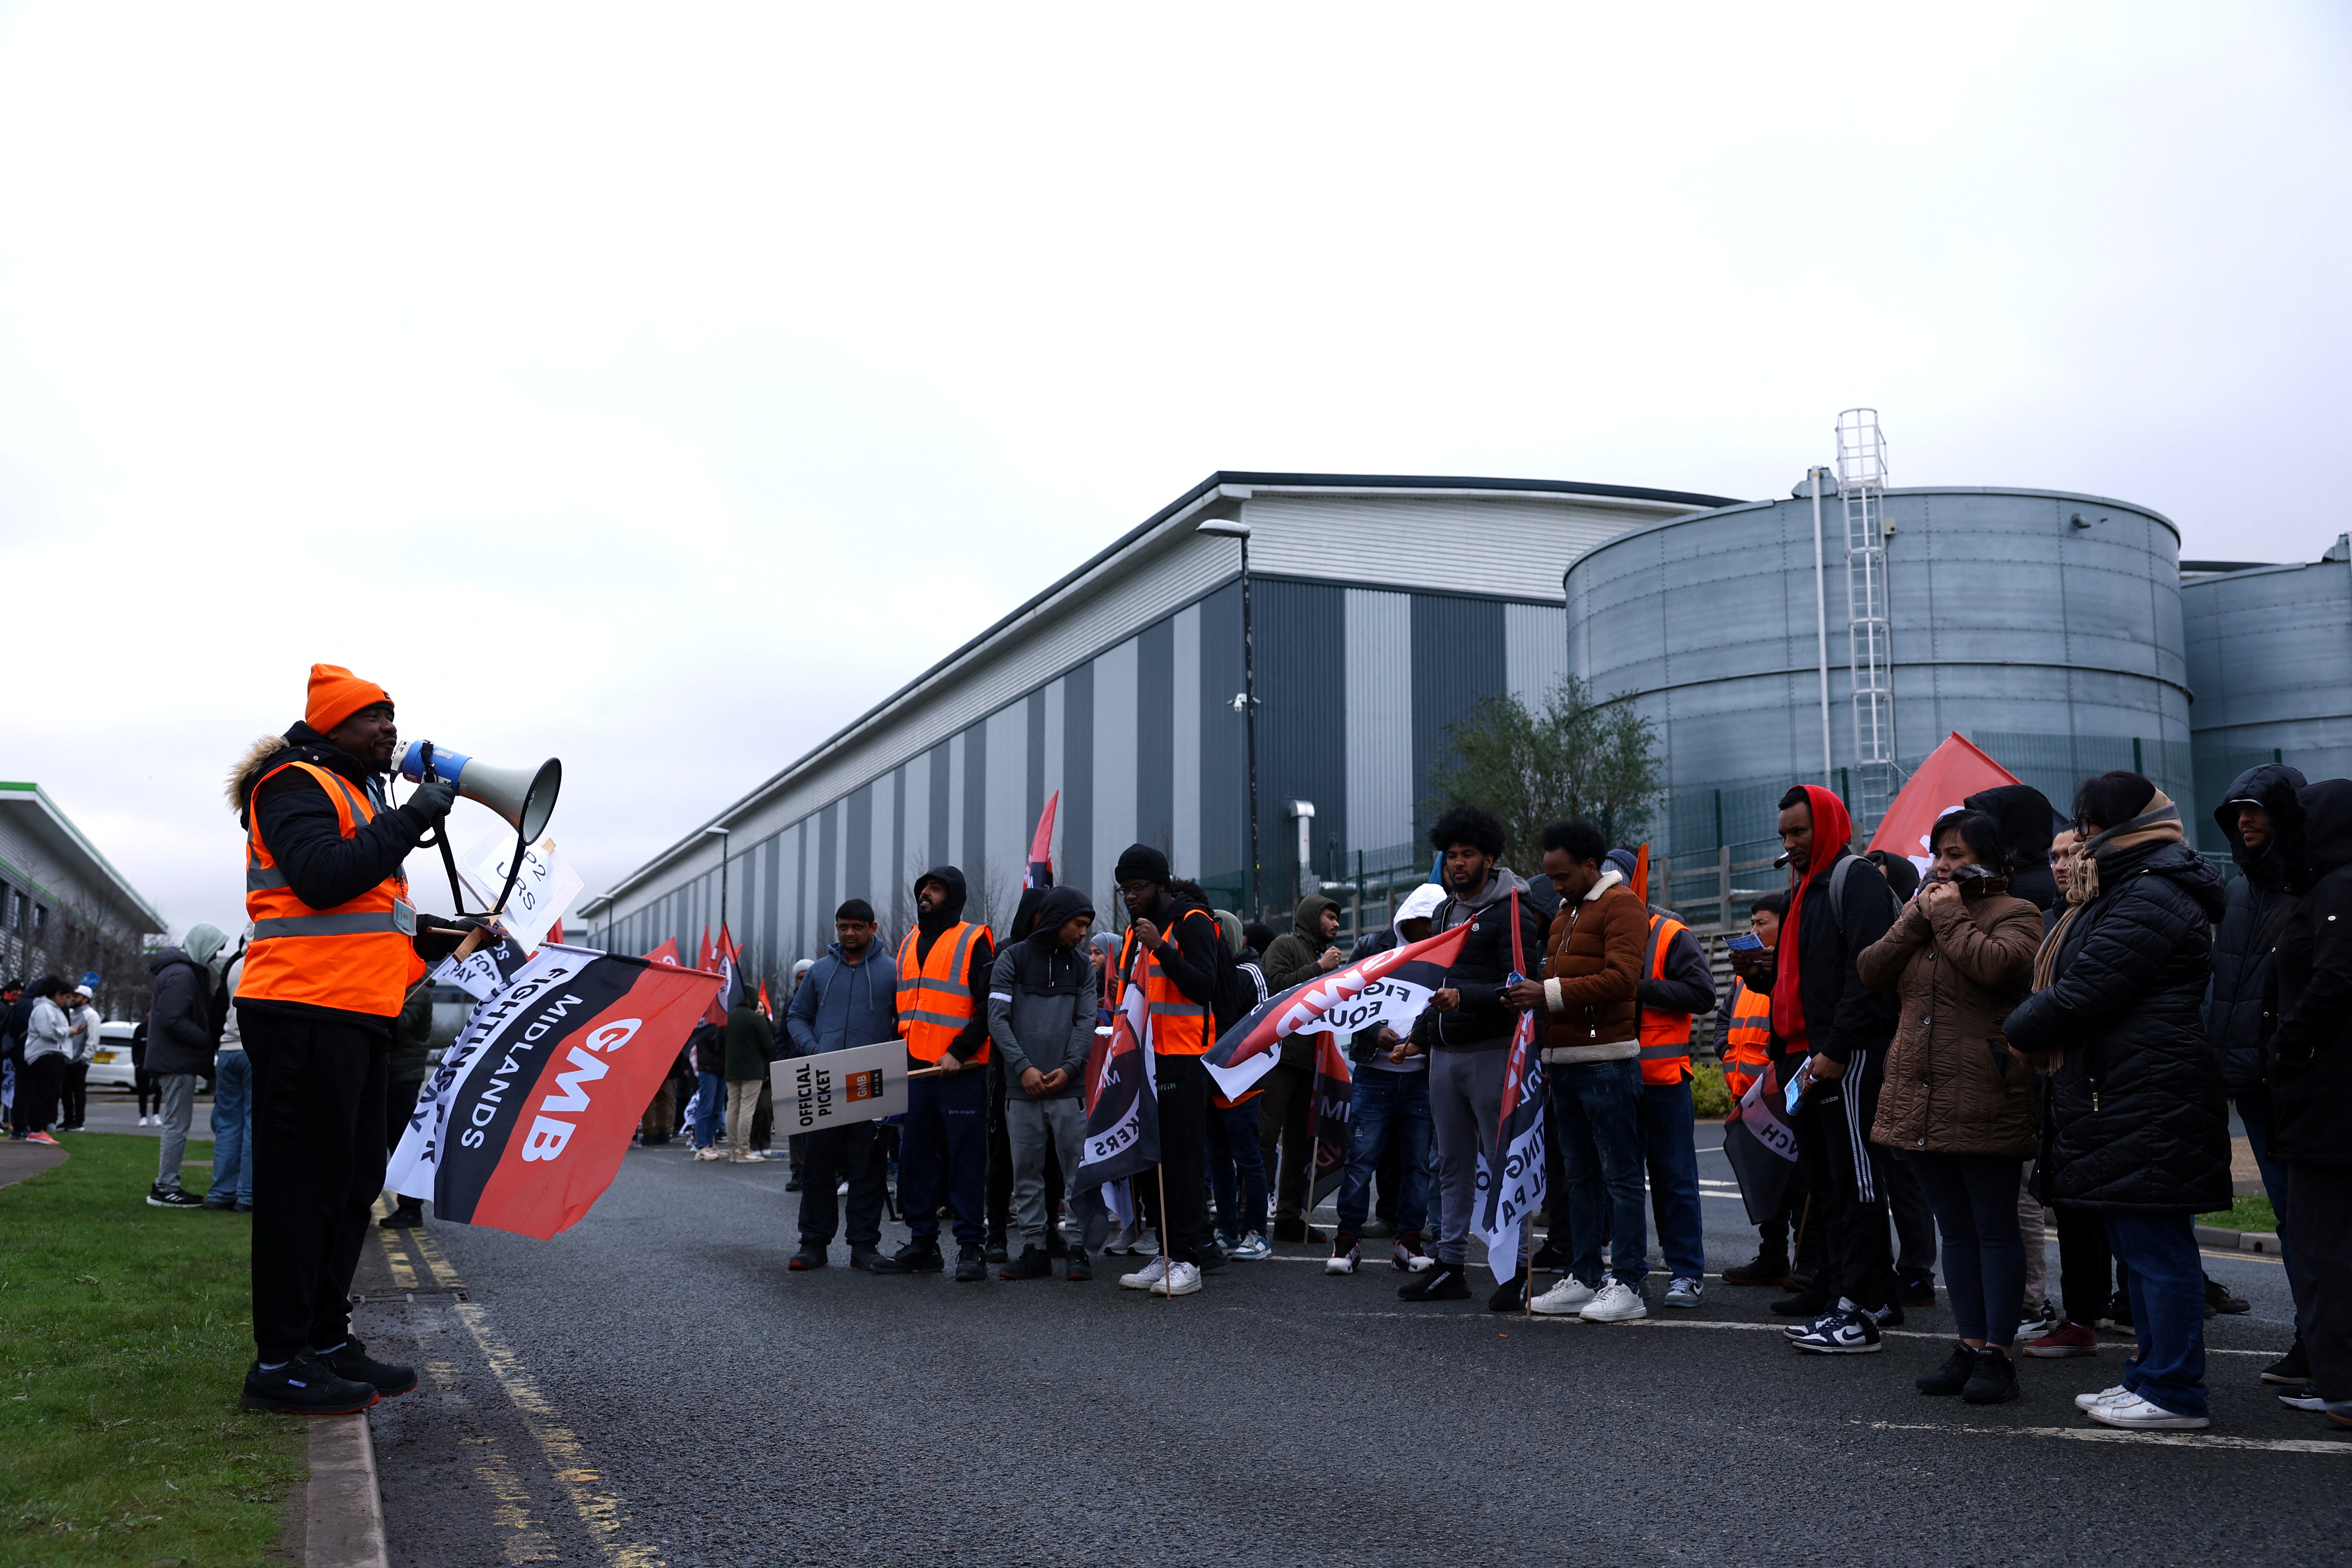 Protestors hold banners during industrial action outside the Amazon warehouse